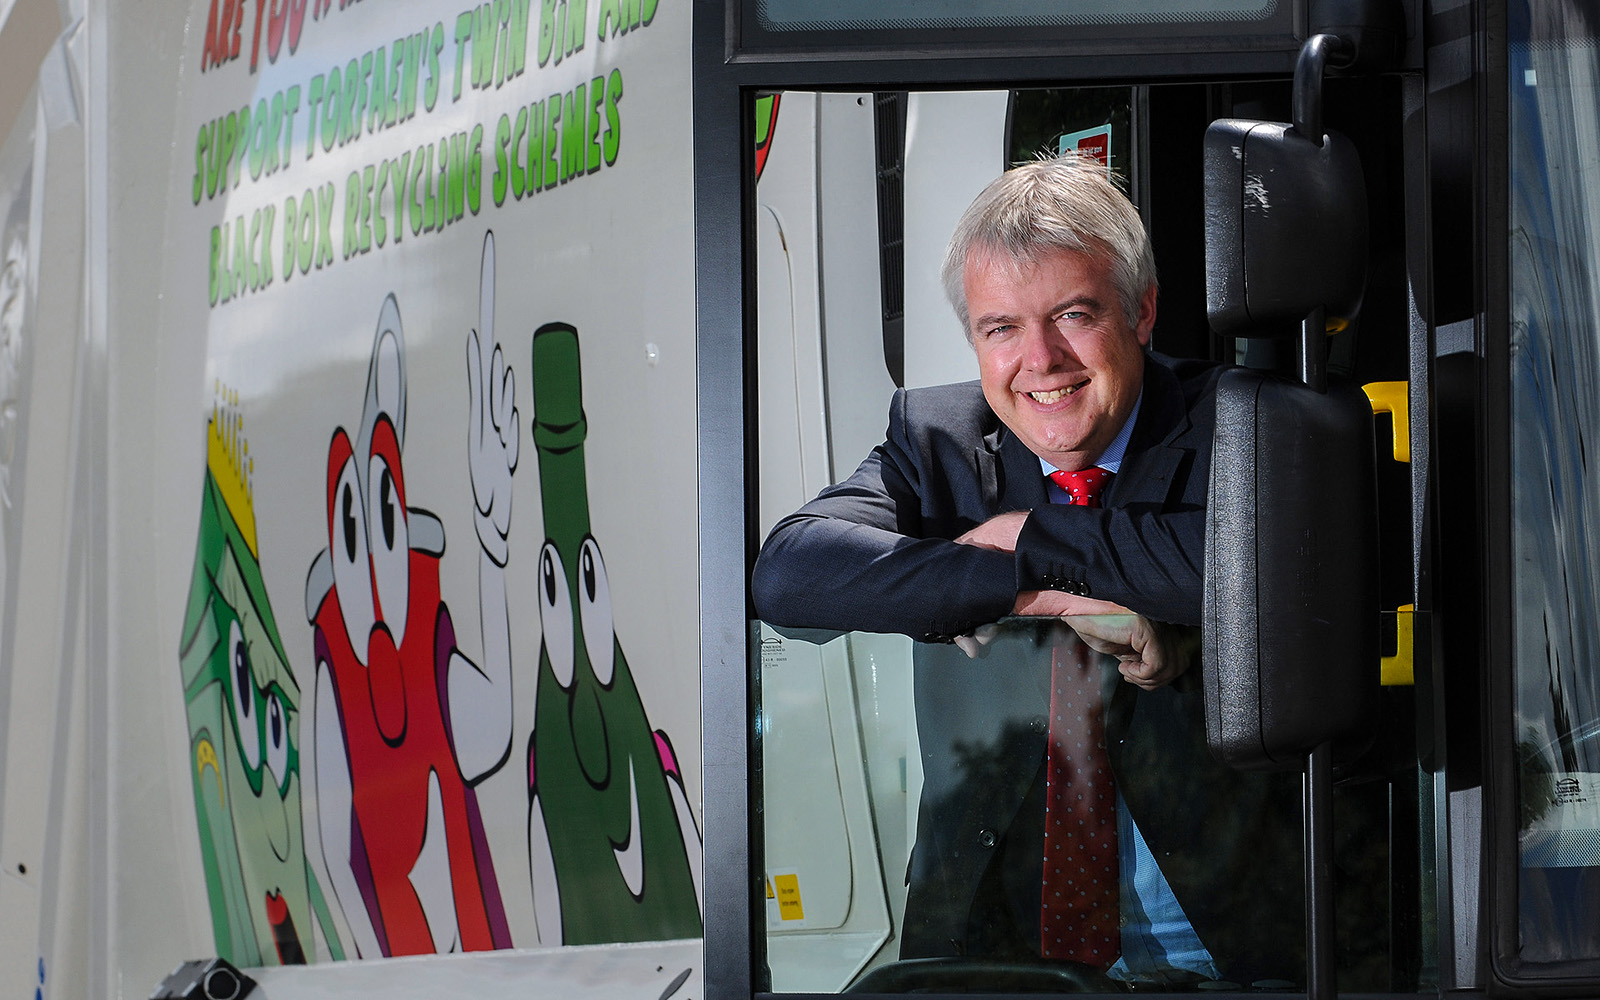 Wales First Minister Carwyn Jones travels by dustbin lorry as part of his tour of public services in Wales for Torfaen County Council